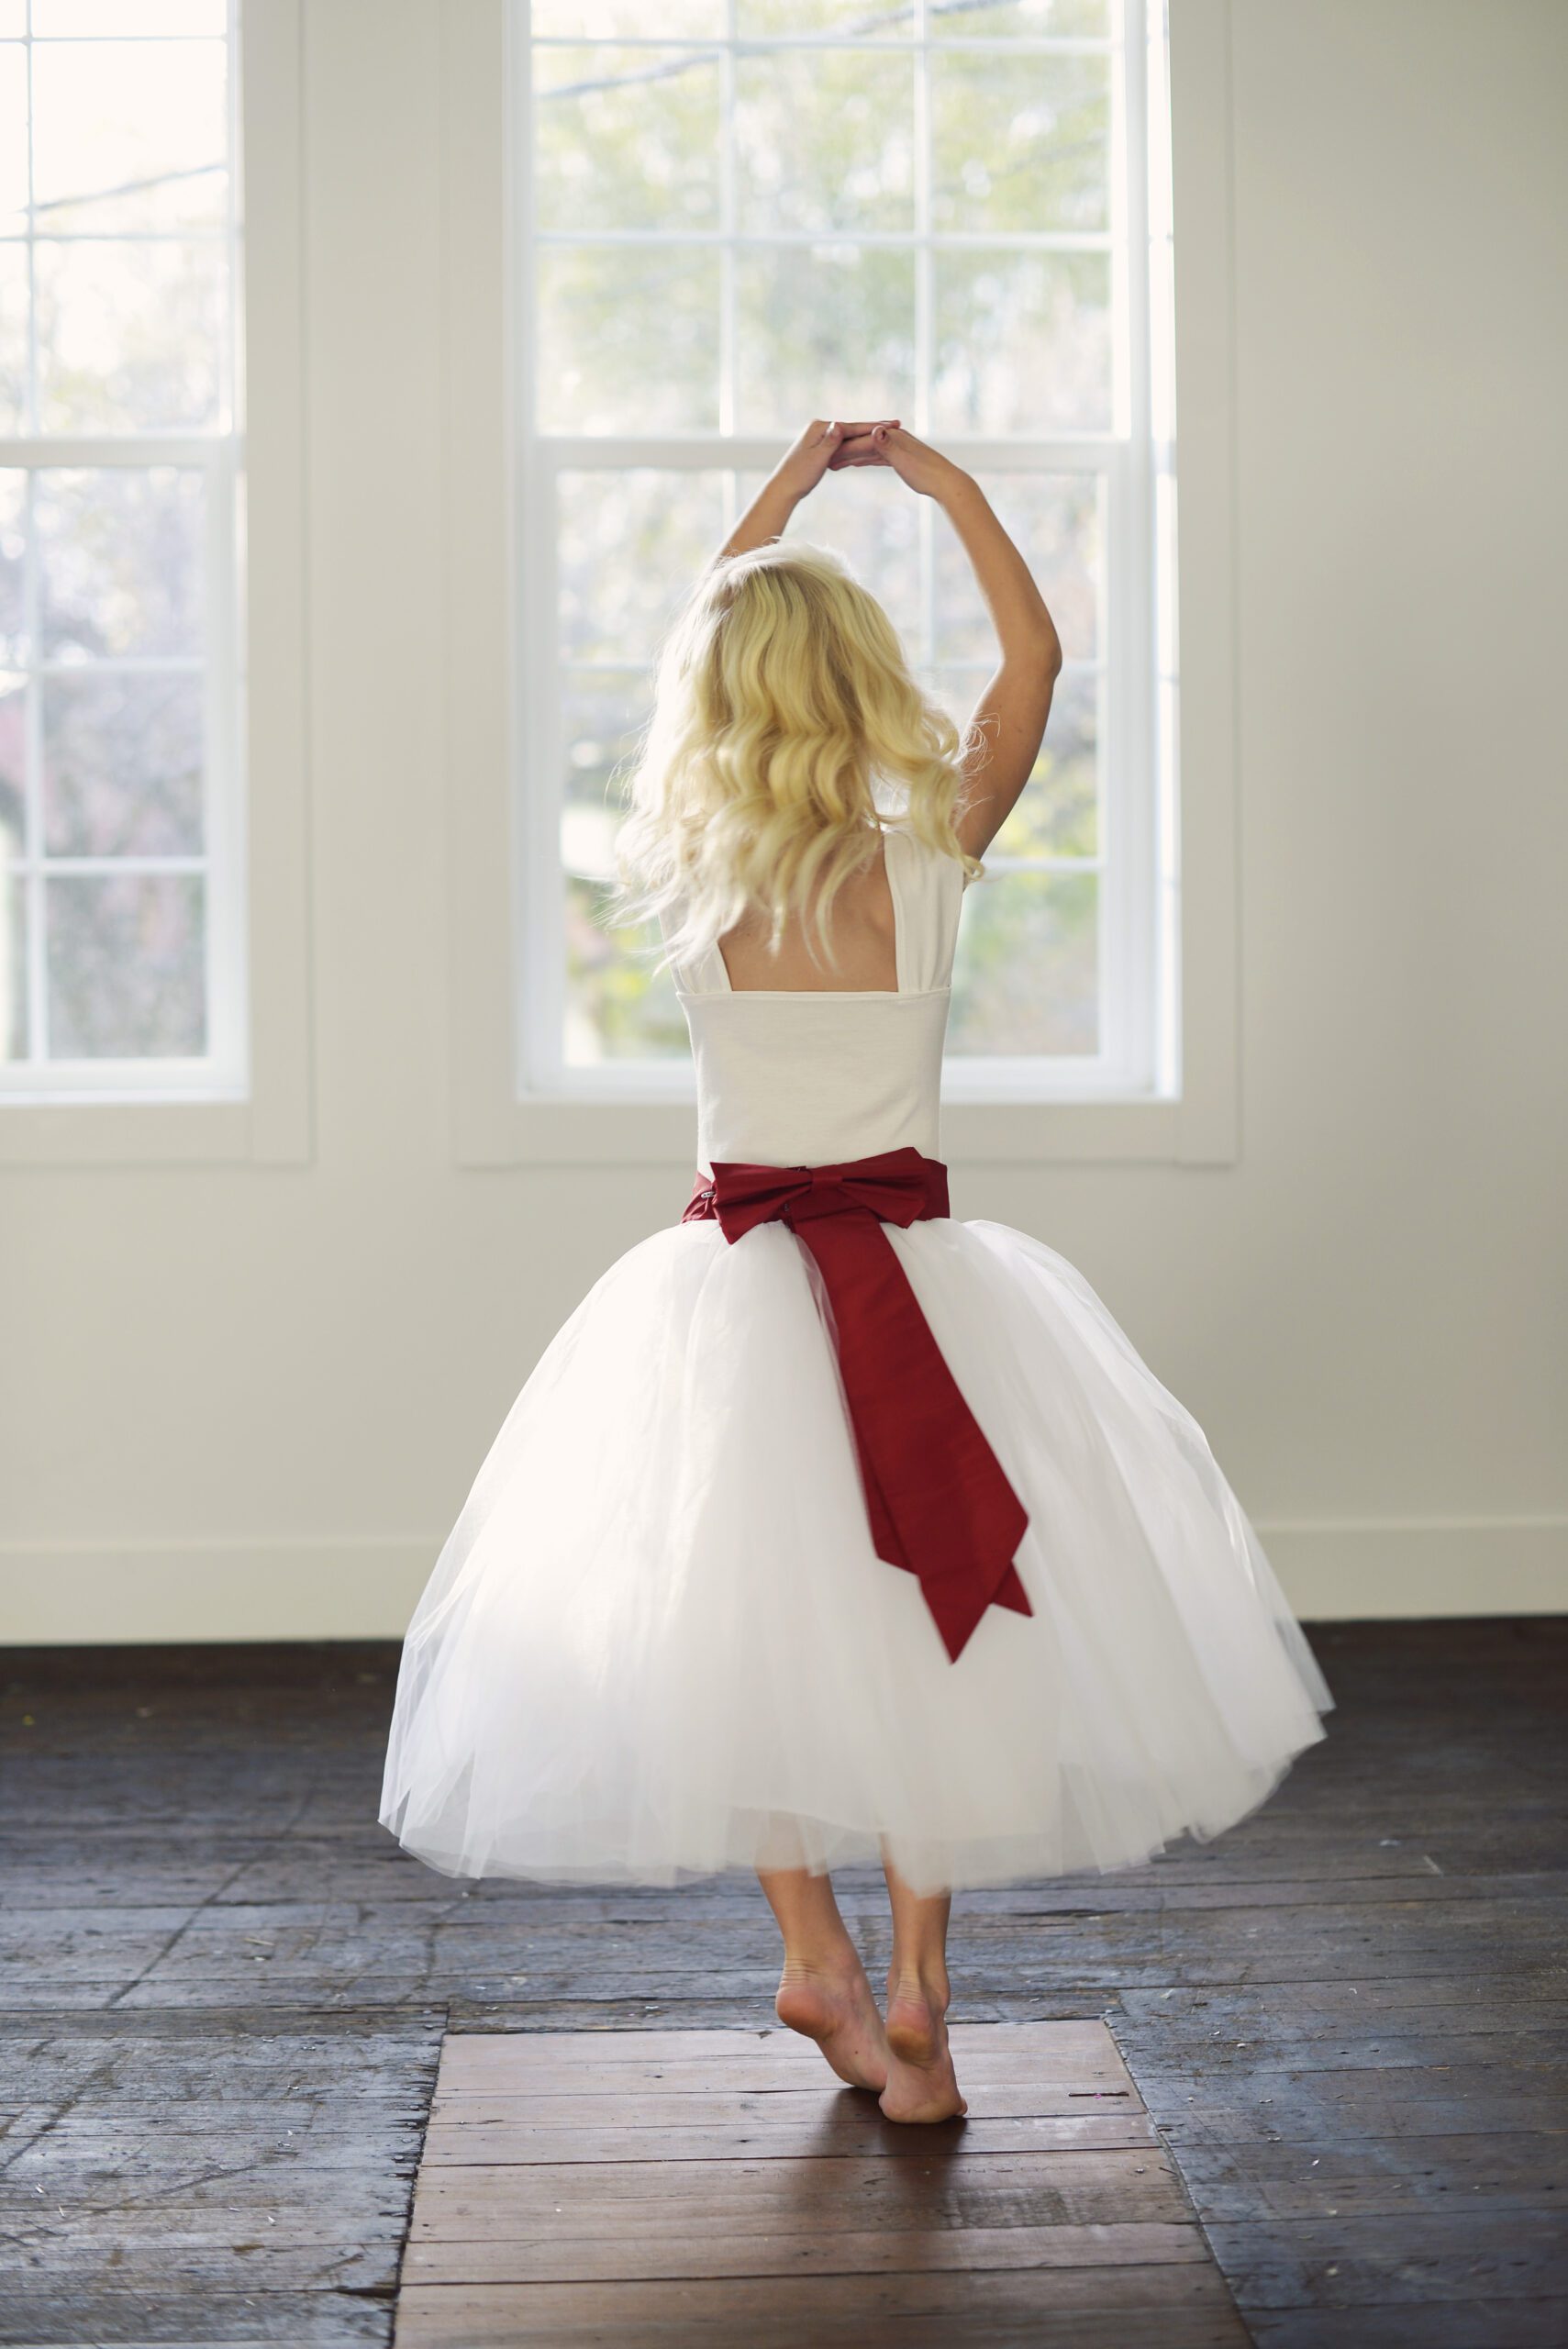 A photo of a flower girl in a red and white tutu skirt